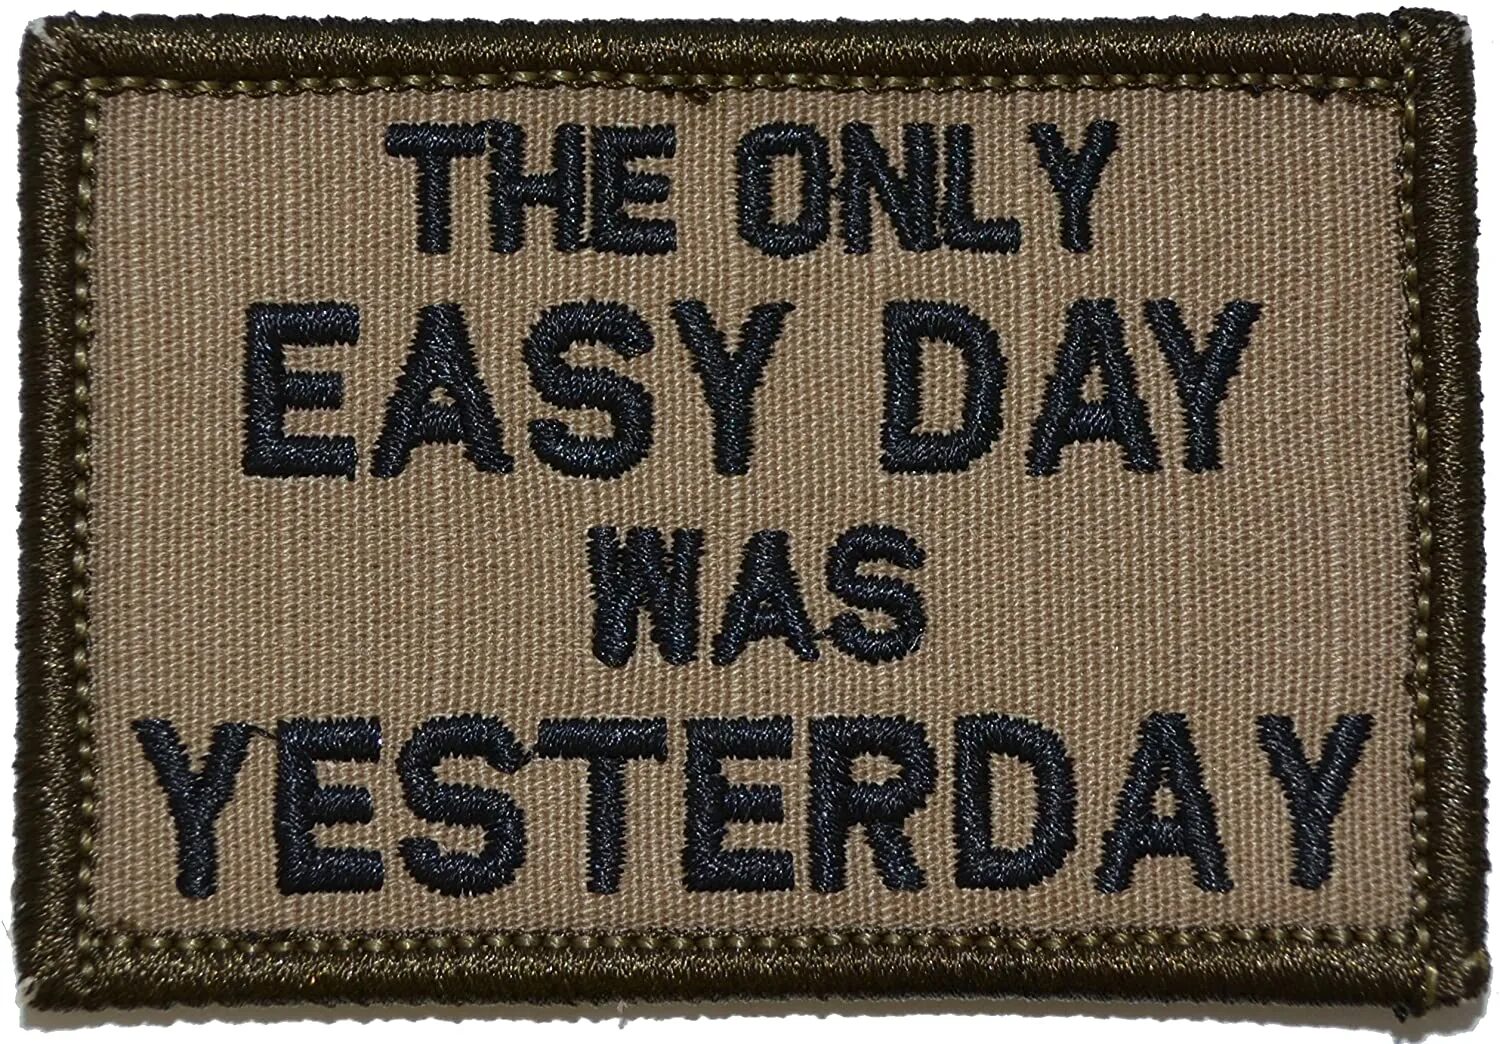 Ready only. The only easy Day was yesterday. The easiest Day was yesterday. Only. Only Day.